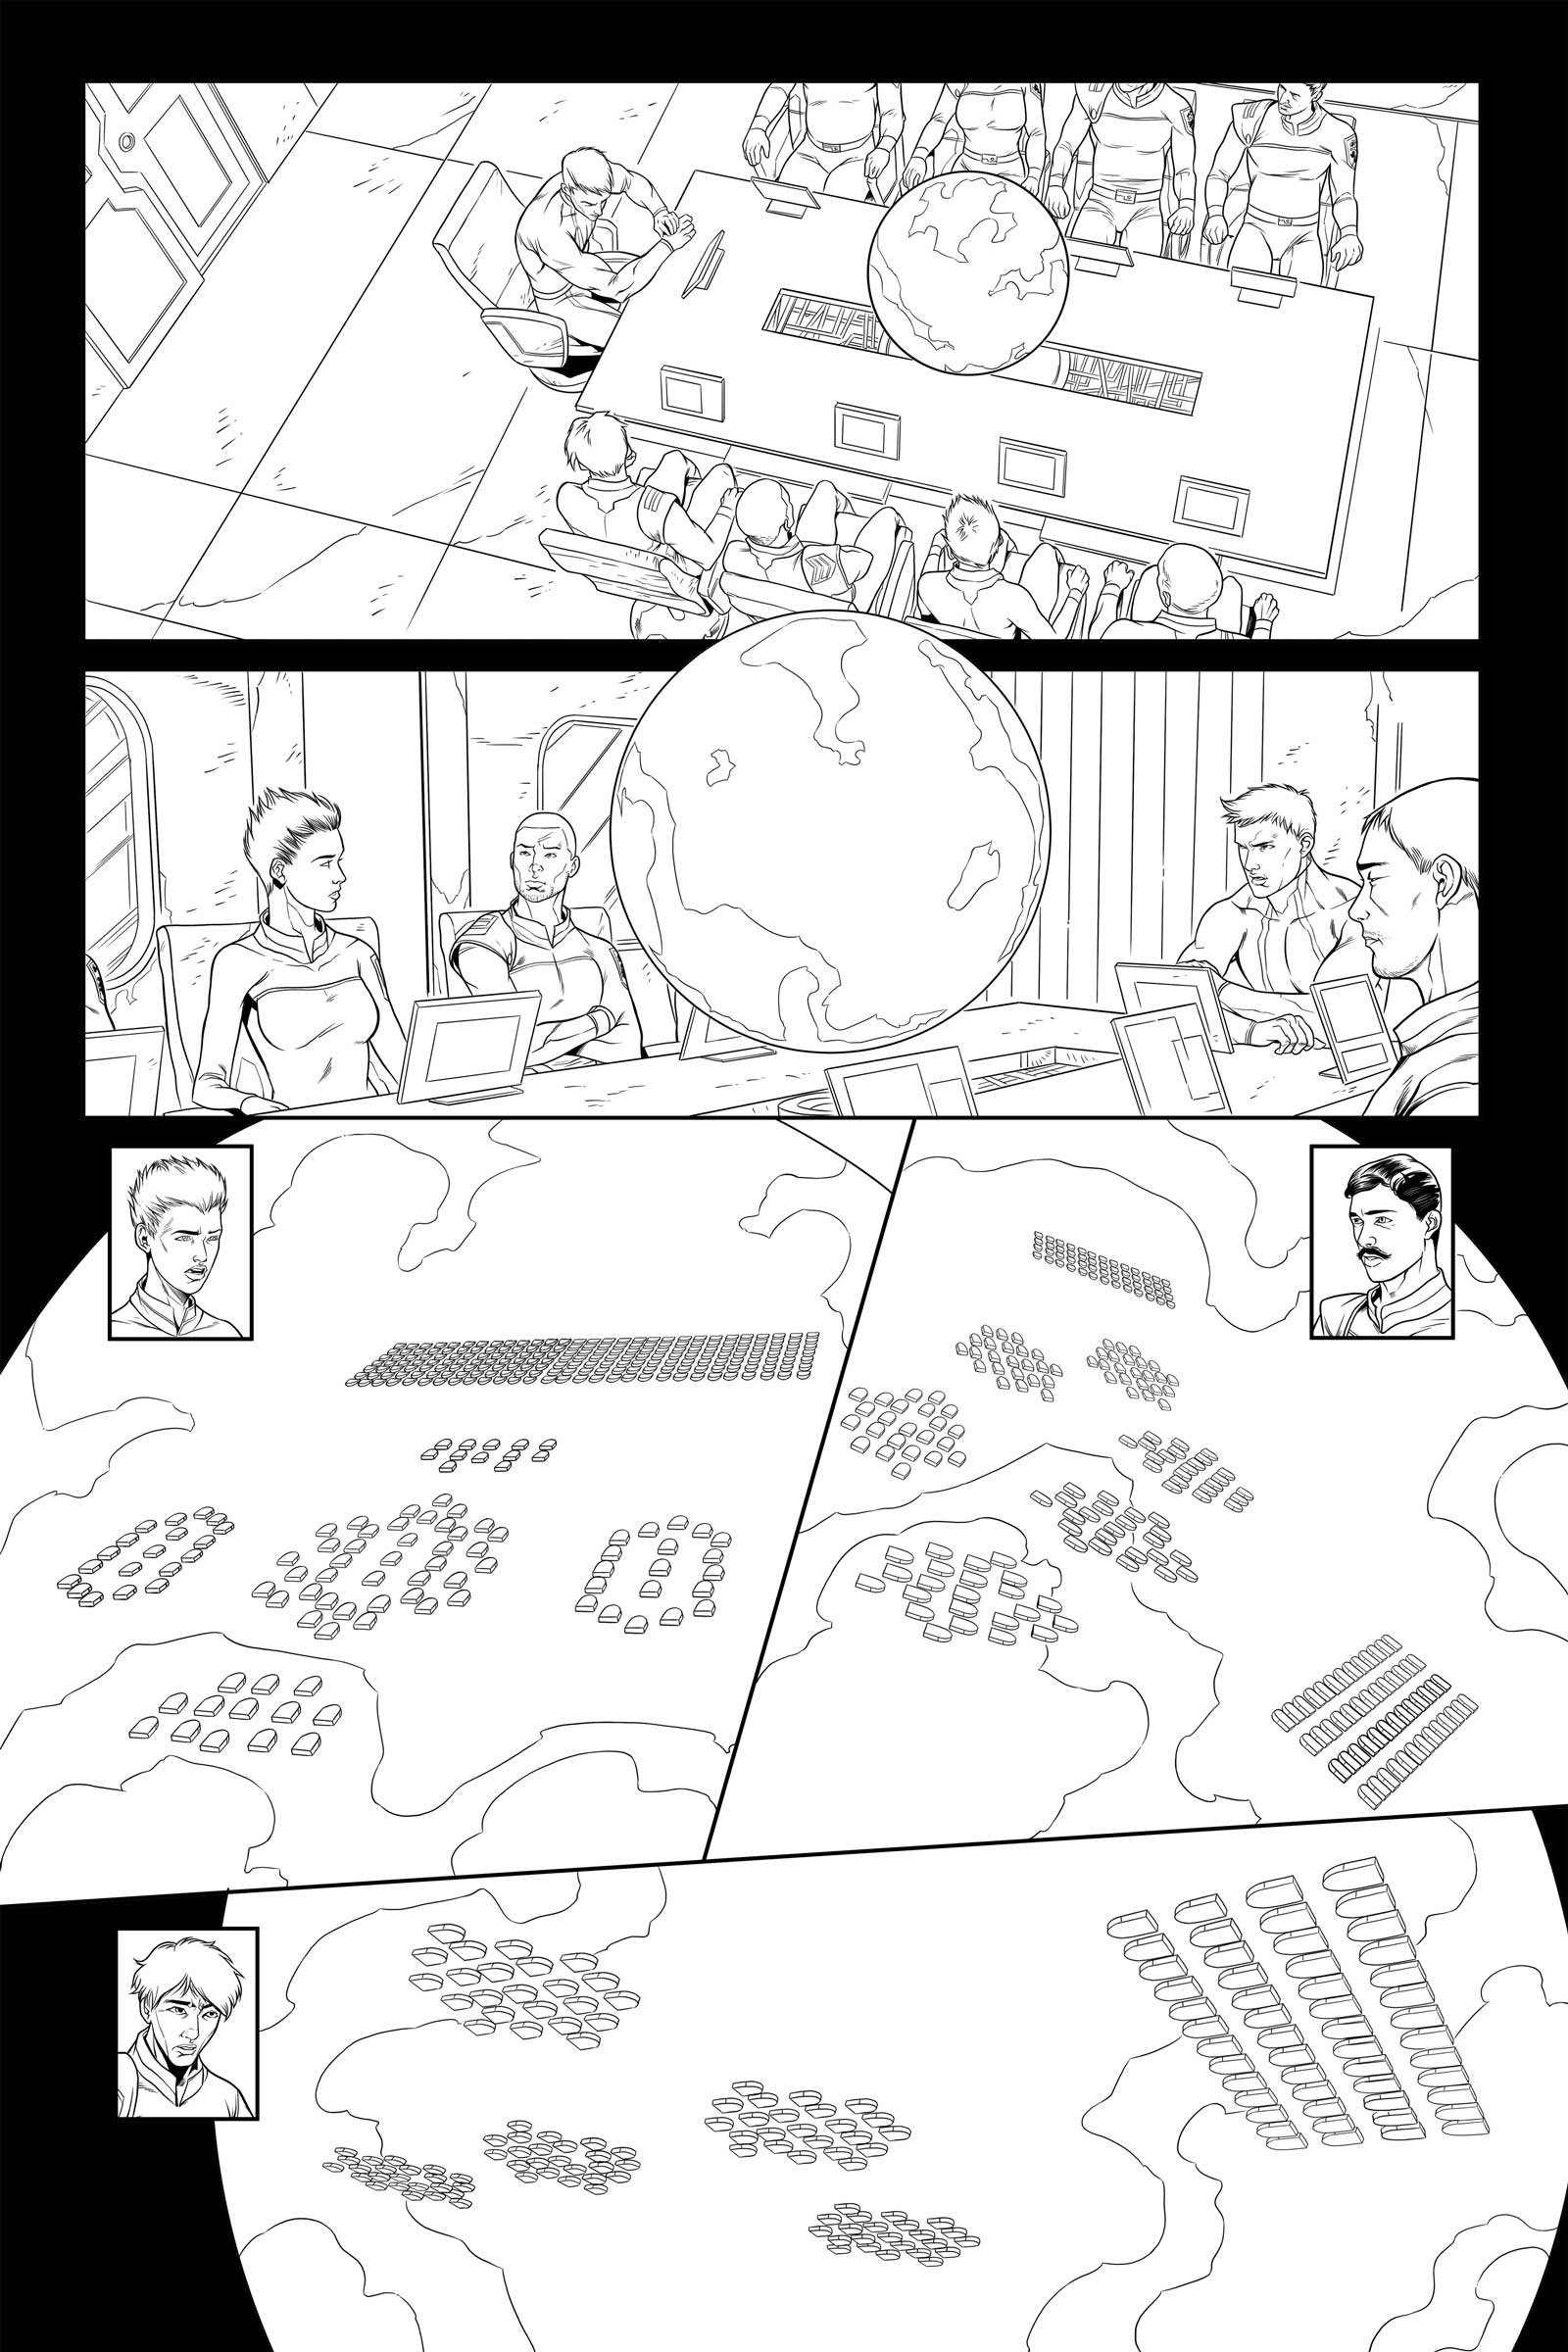 Lost Fleet #4 Page 7 - First Pass. First inks for a page featuring a battle simulation that wasn't quite in keeping with the Lost Fleet novels